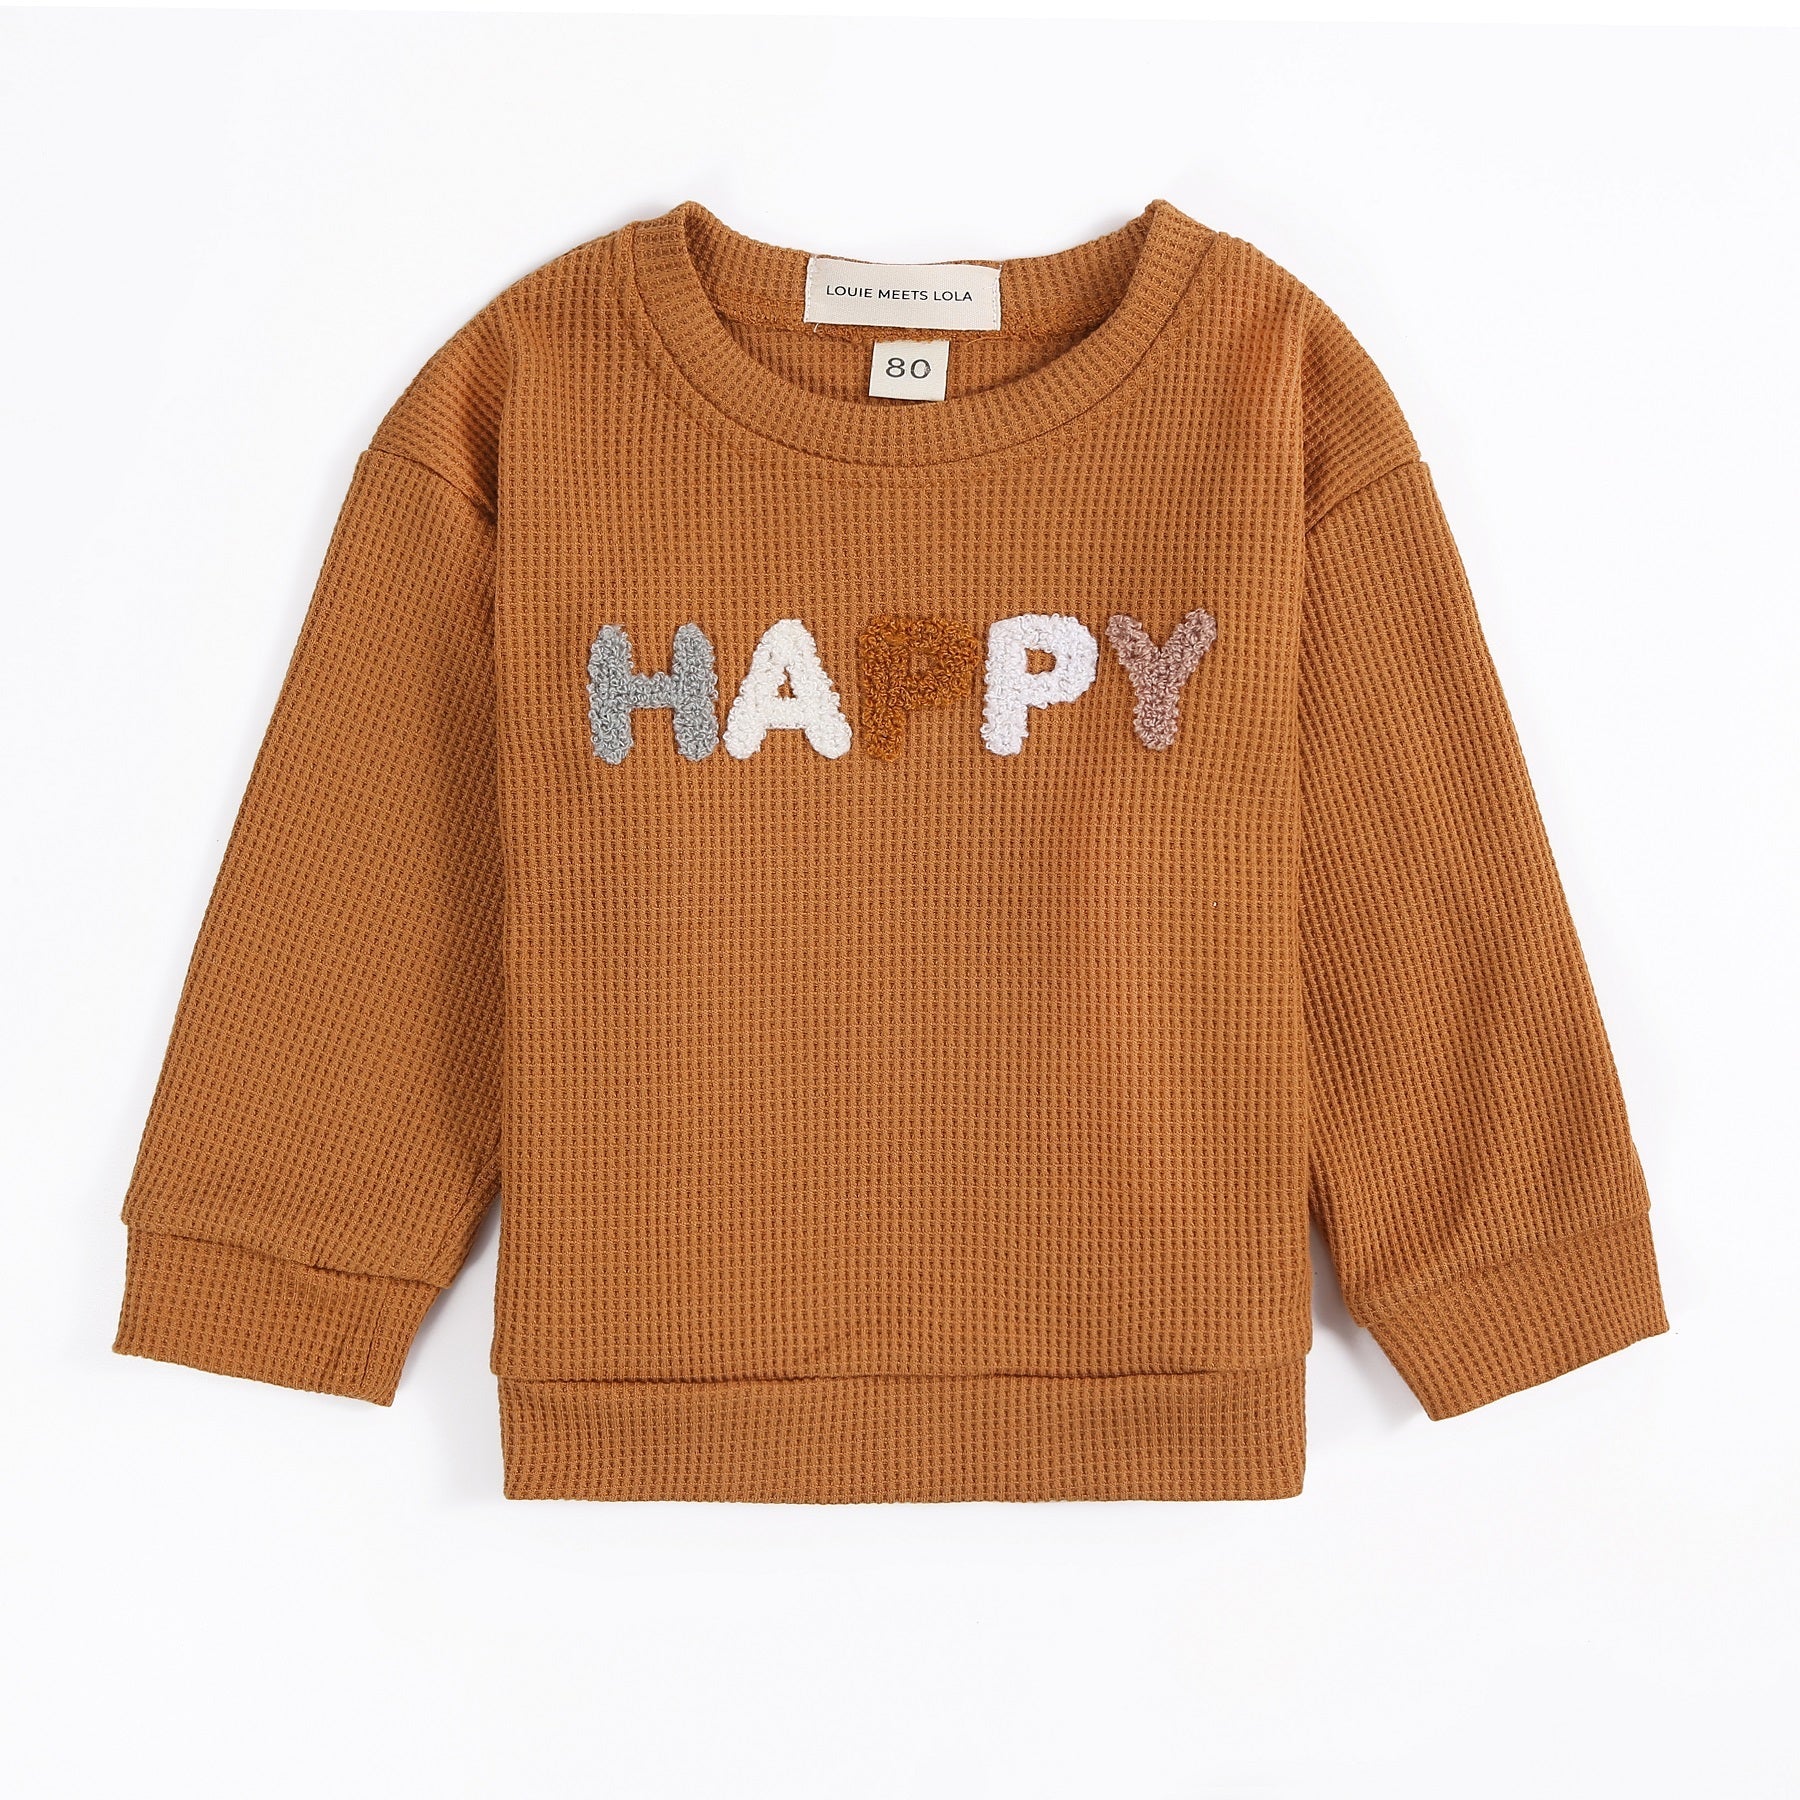 Happy Waffle Set - Buy Baby & Toddler Outfits at Louie Meets Lola